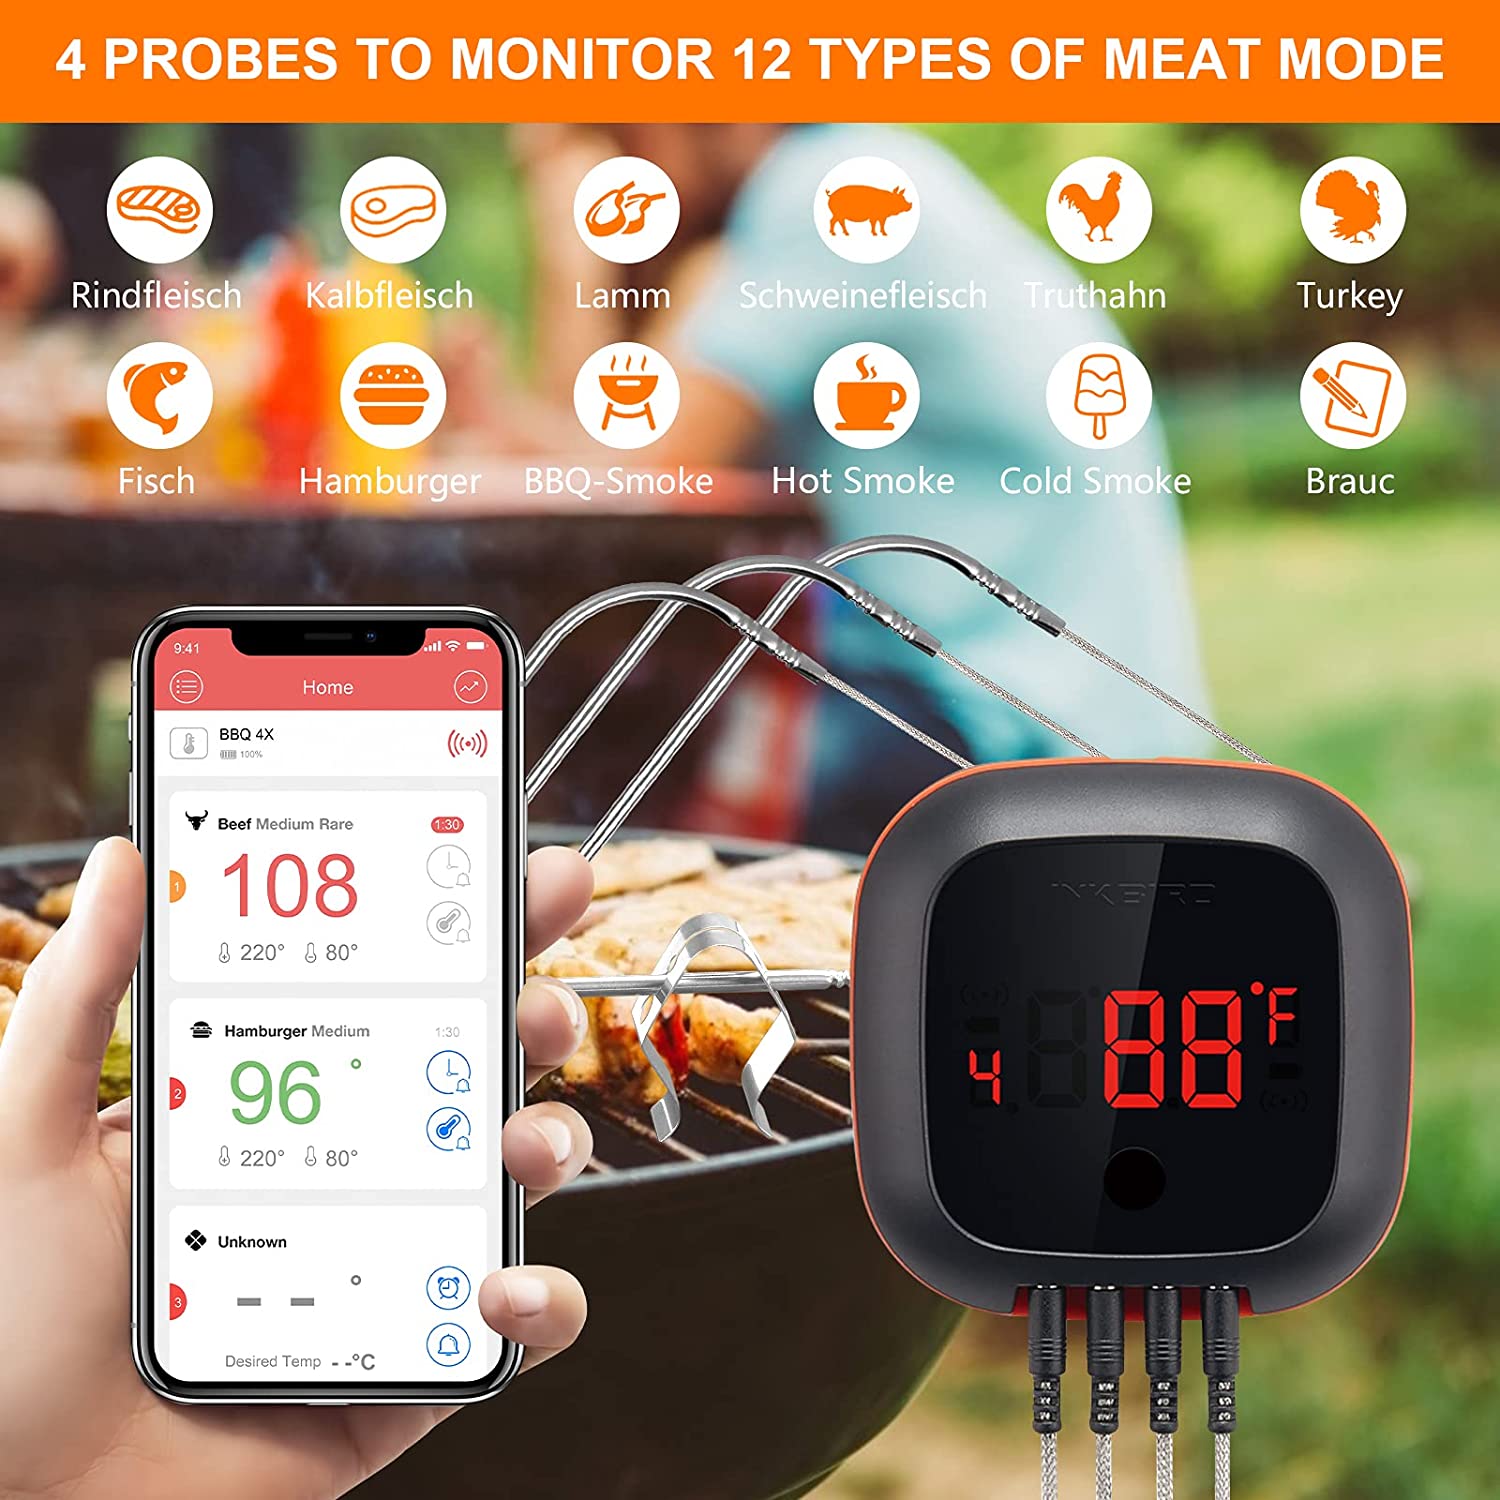 Inkbird ISC-007BW BBQ Temperature Controller, Wireless Automatic Food Thermometer, Free Adapter and Carry-All Case